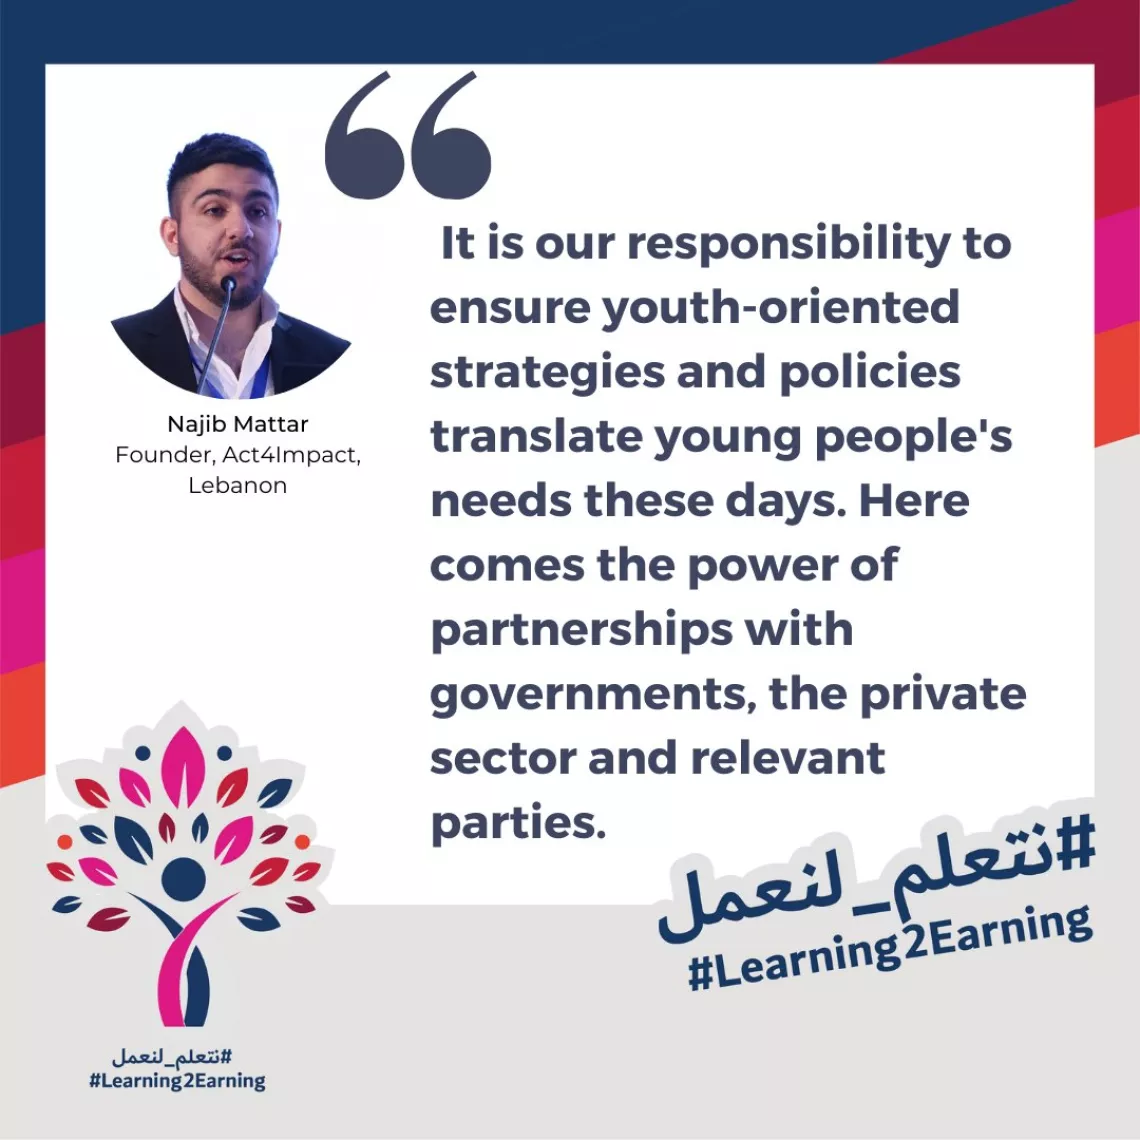 Quote card of Najib Matar Founder, Act4Impact, Lebanon: "It is our responsibility to ensure youth-oriented strategies and policies translate young people's needs these days. Here comes the power of partnerships with governments, the private sector and relevant parties."